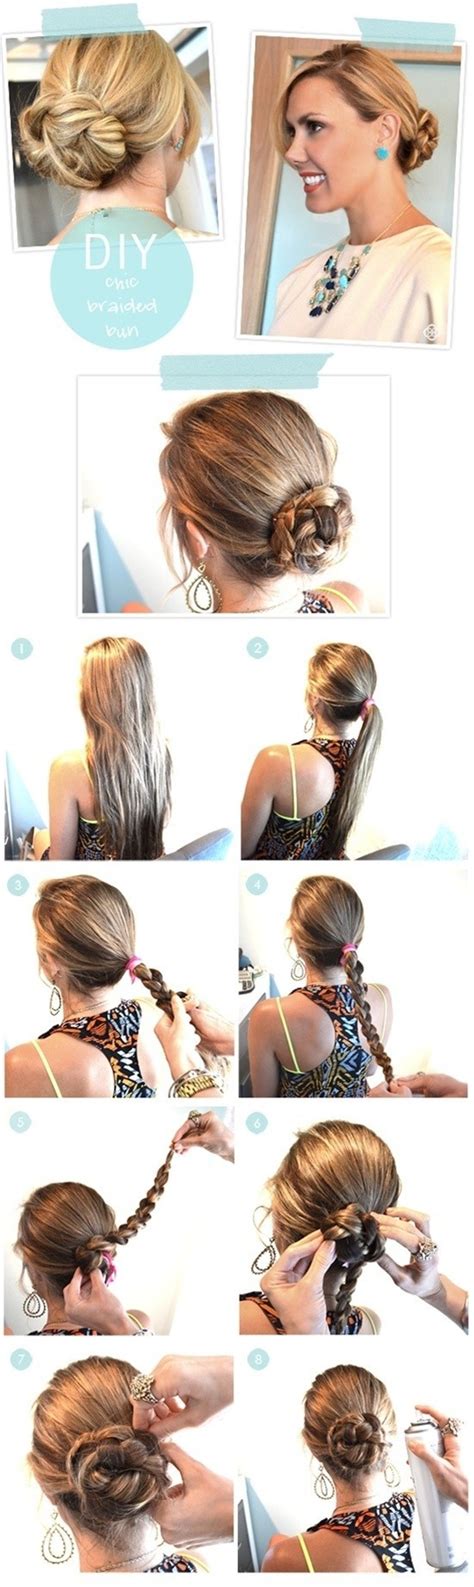 Twist the two braids together and pin them up into a cute compact bun. 15 Beautiful Long Hairstyles with Tutorials - Pretty Designs